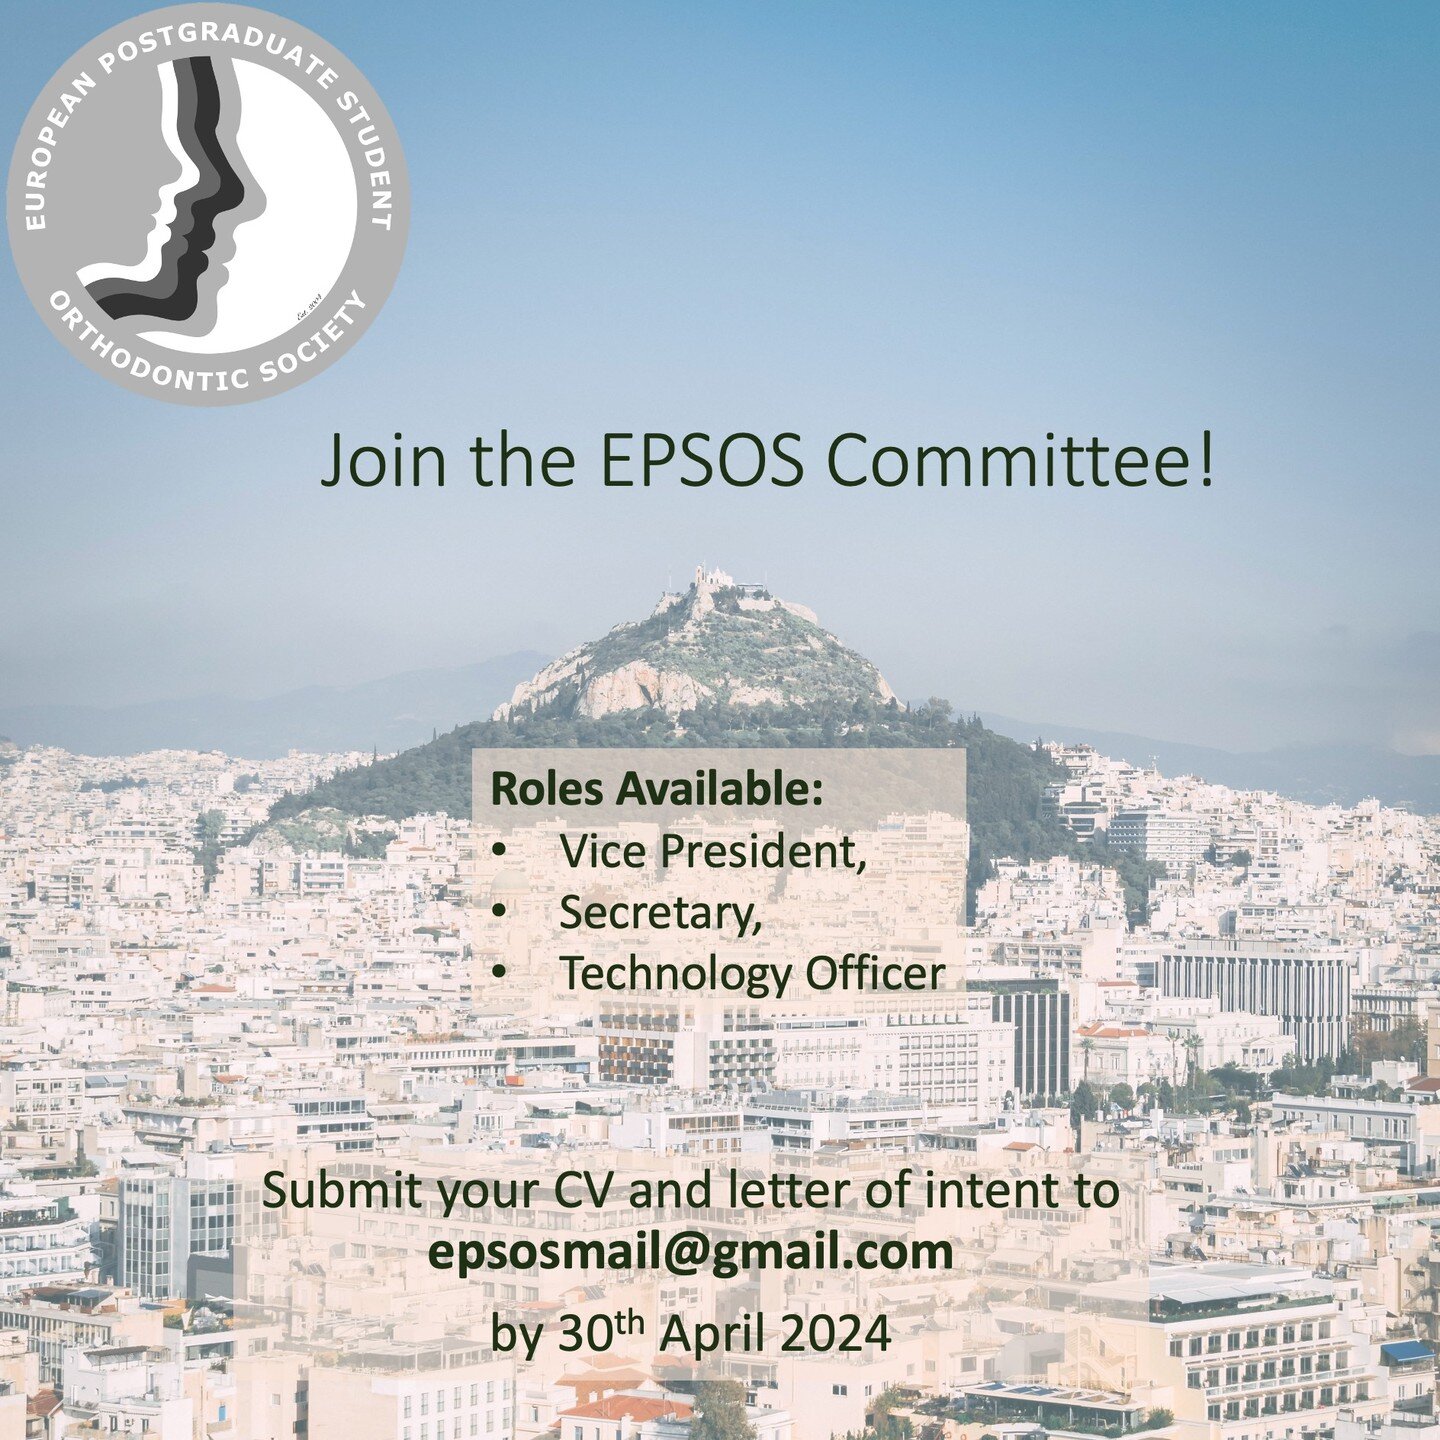 If you would like to be considered for one of our committee roles, please send a CV and motivation letter to&nbsp;epsosmail@gmail.com.&nbsp;

Candidates will be required to deliver a 3-minute pitch in Athens at the 20th EPSOS Meeting. Elections will 